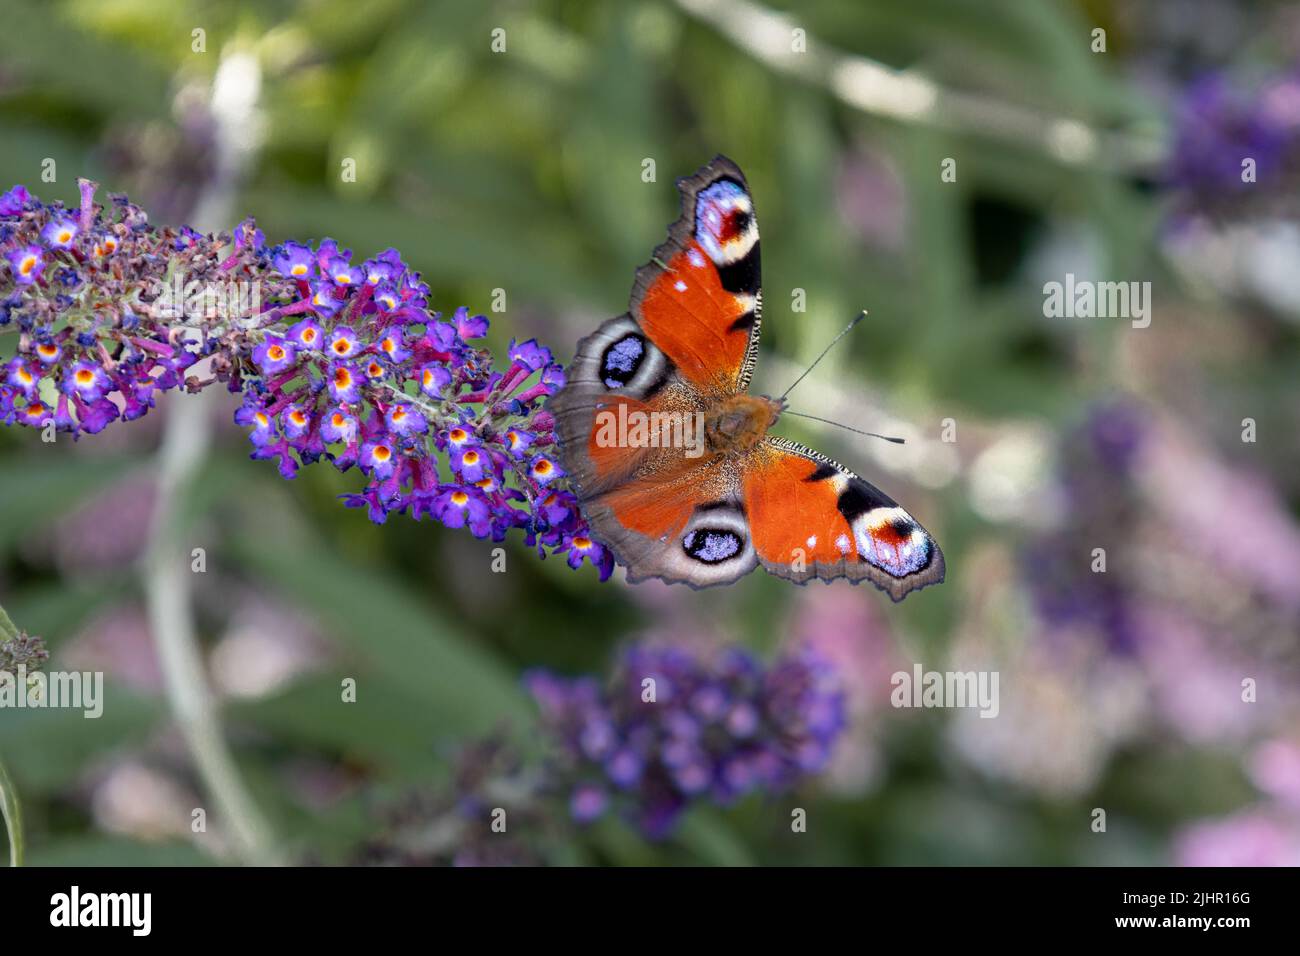 The peacock butterfly on a butterfly bush with bright colors and a drawing on the wings that resemble eyes, to deter predators Stock Photo